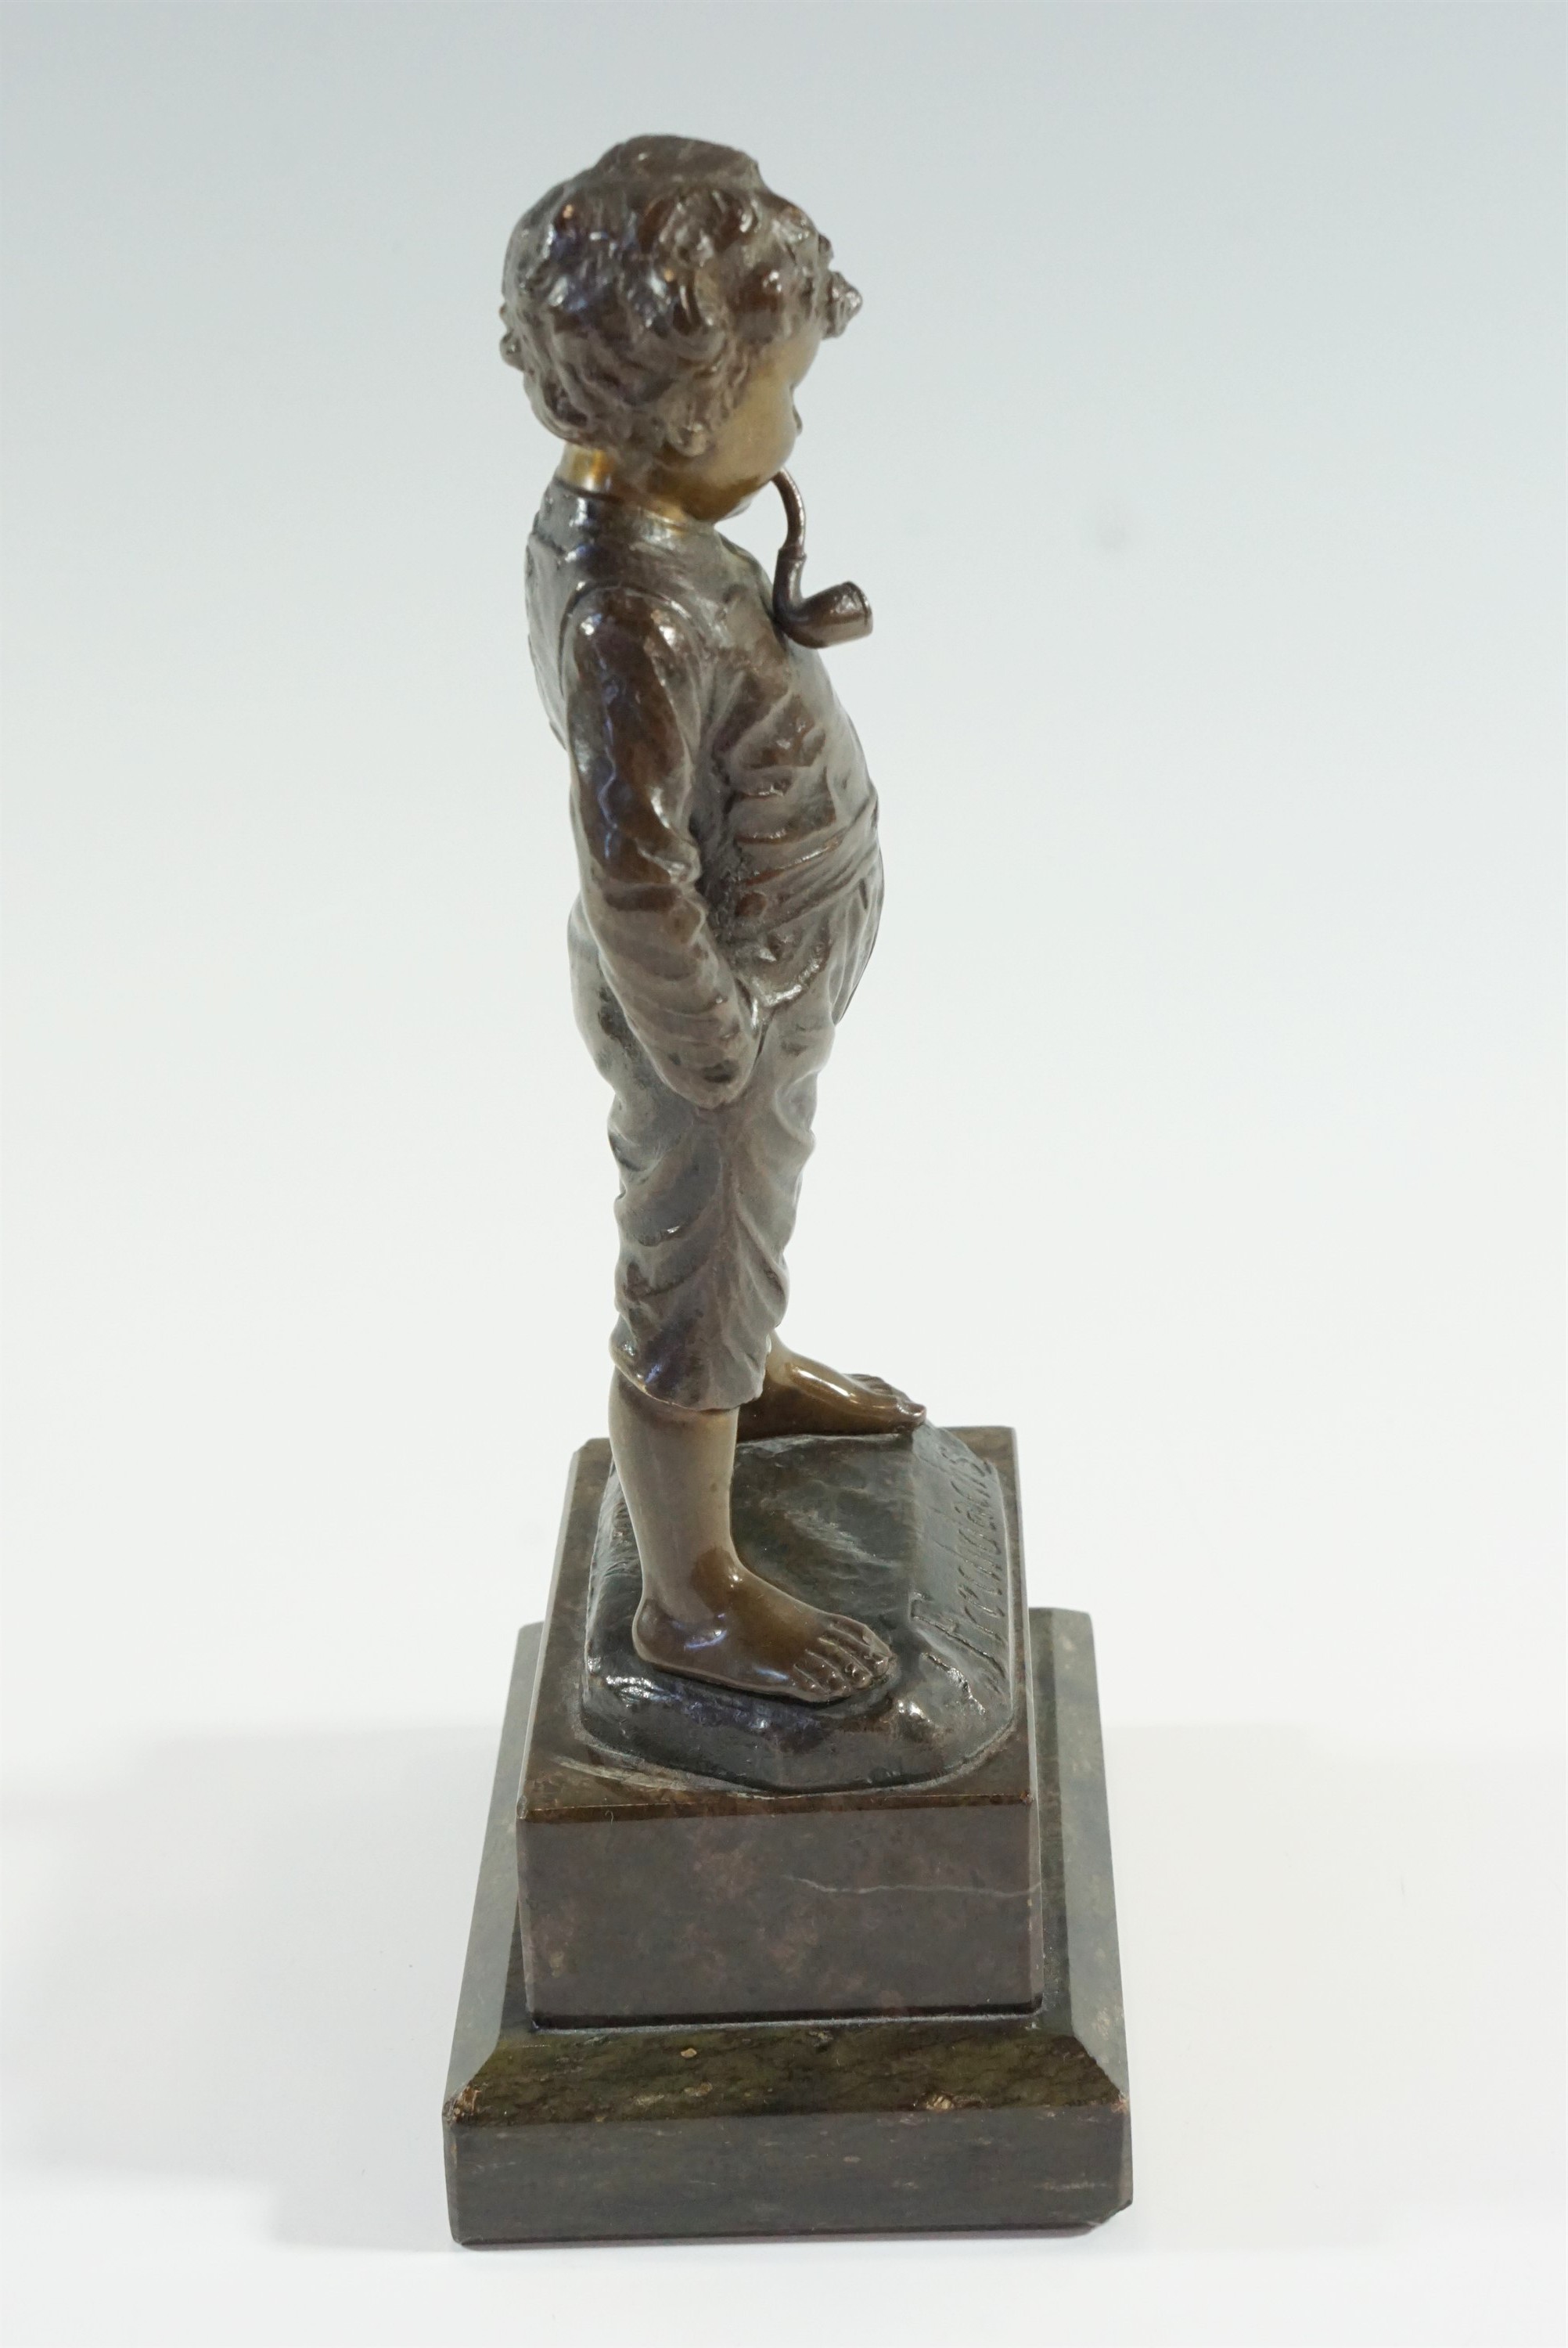 After R Hobold (German, 19th Century) "Frechdachs", [cheeky monkey], a cast bronze figure of a young - Image 2 of 5